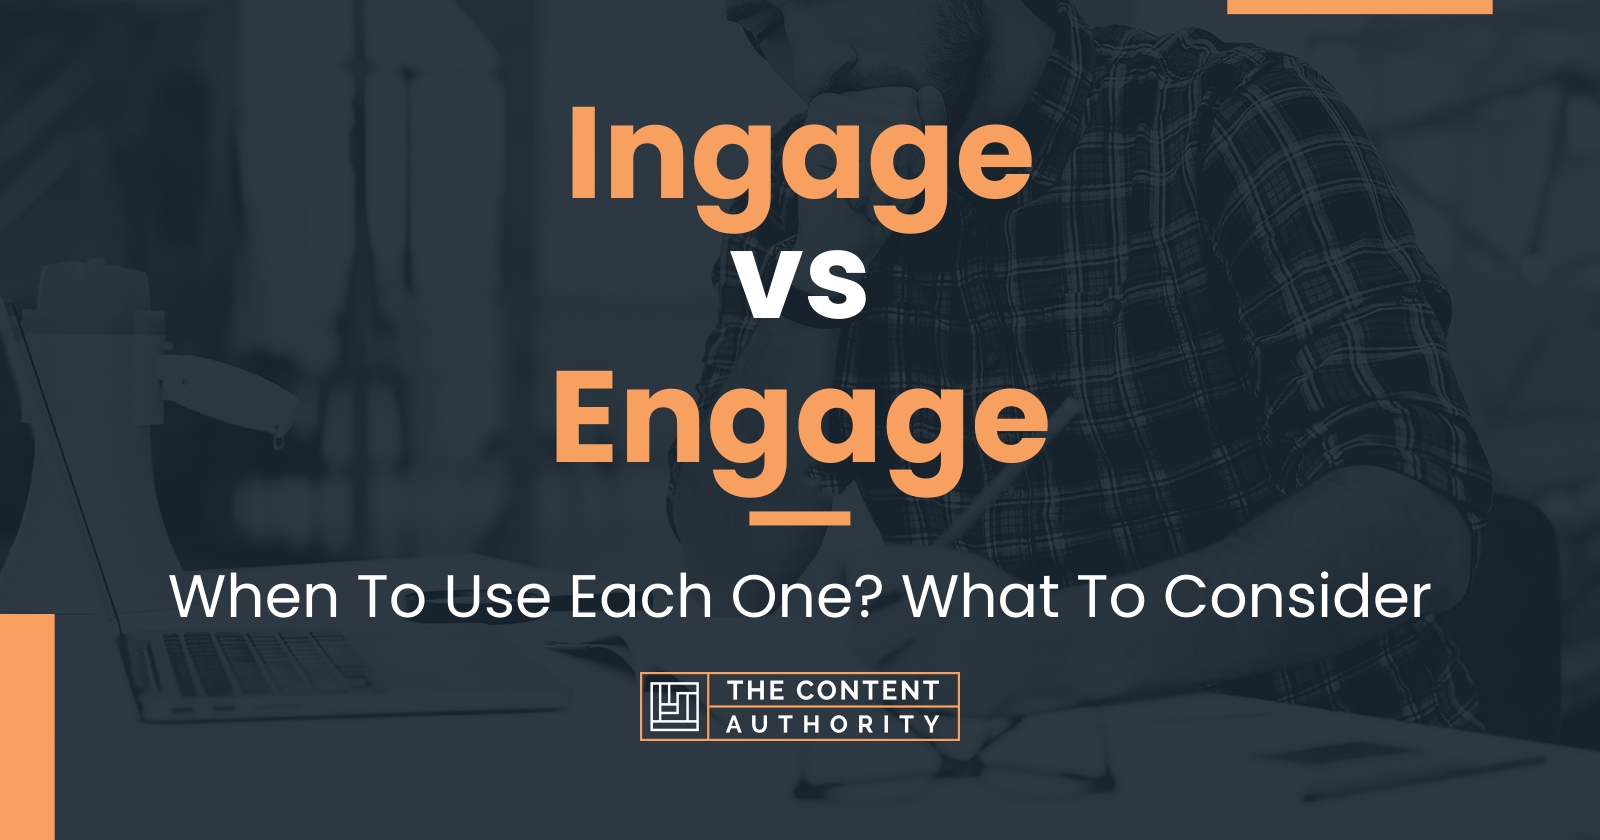 Ingage vs Engage: When To Use Each One? What To Consider